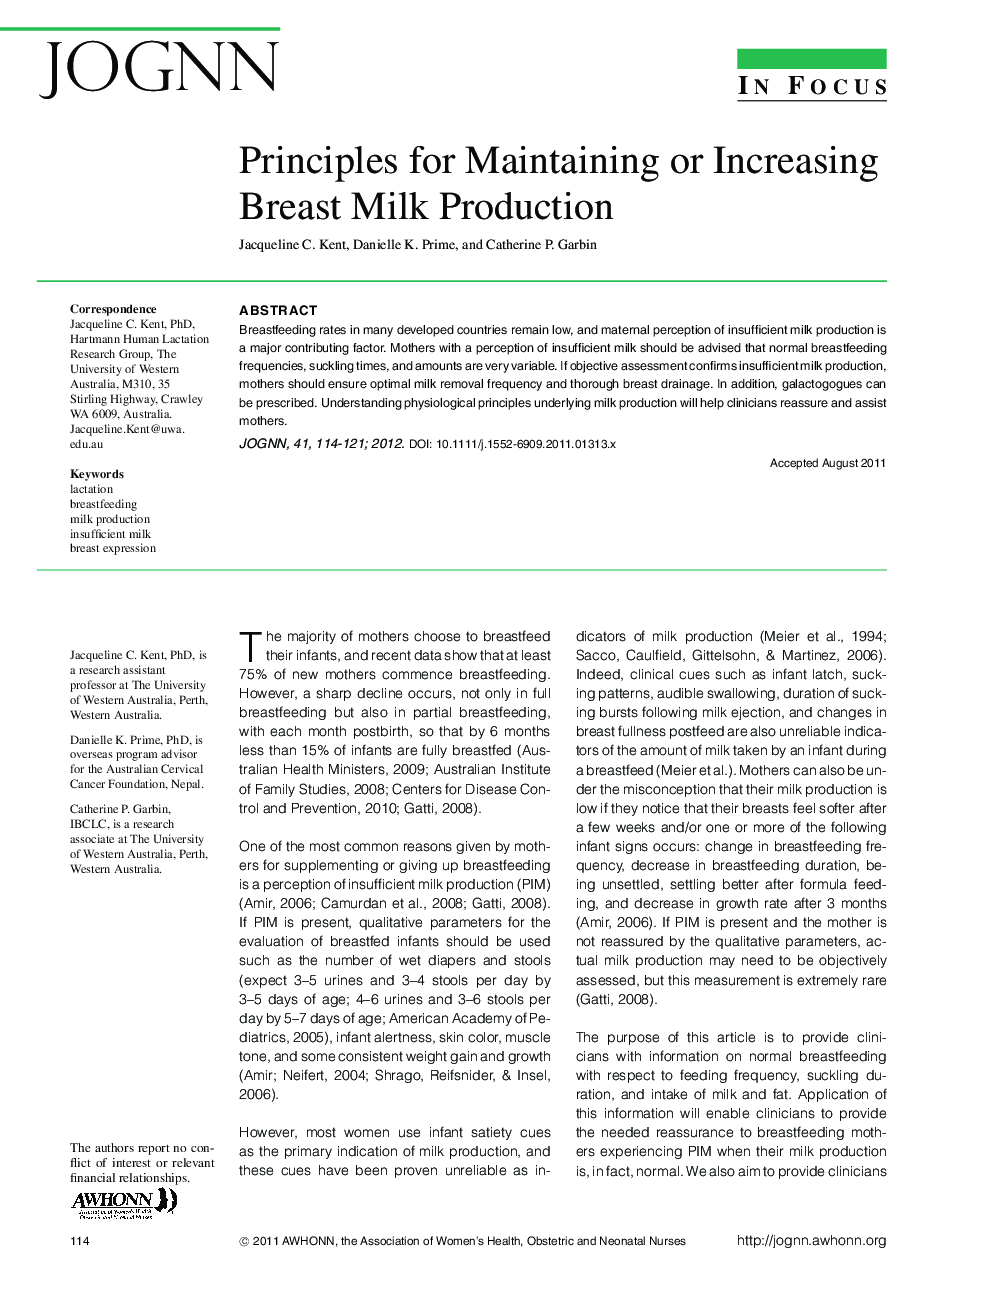 Principles for Maintaining or Increasing Breast Milk Production